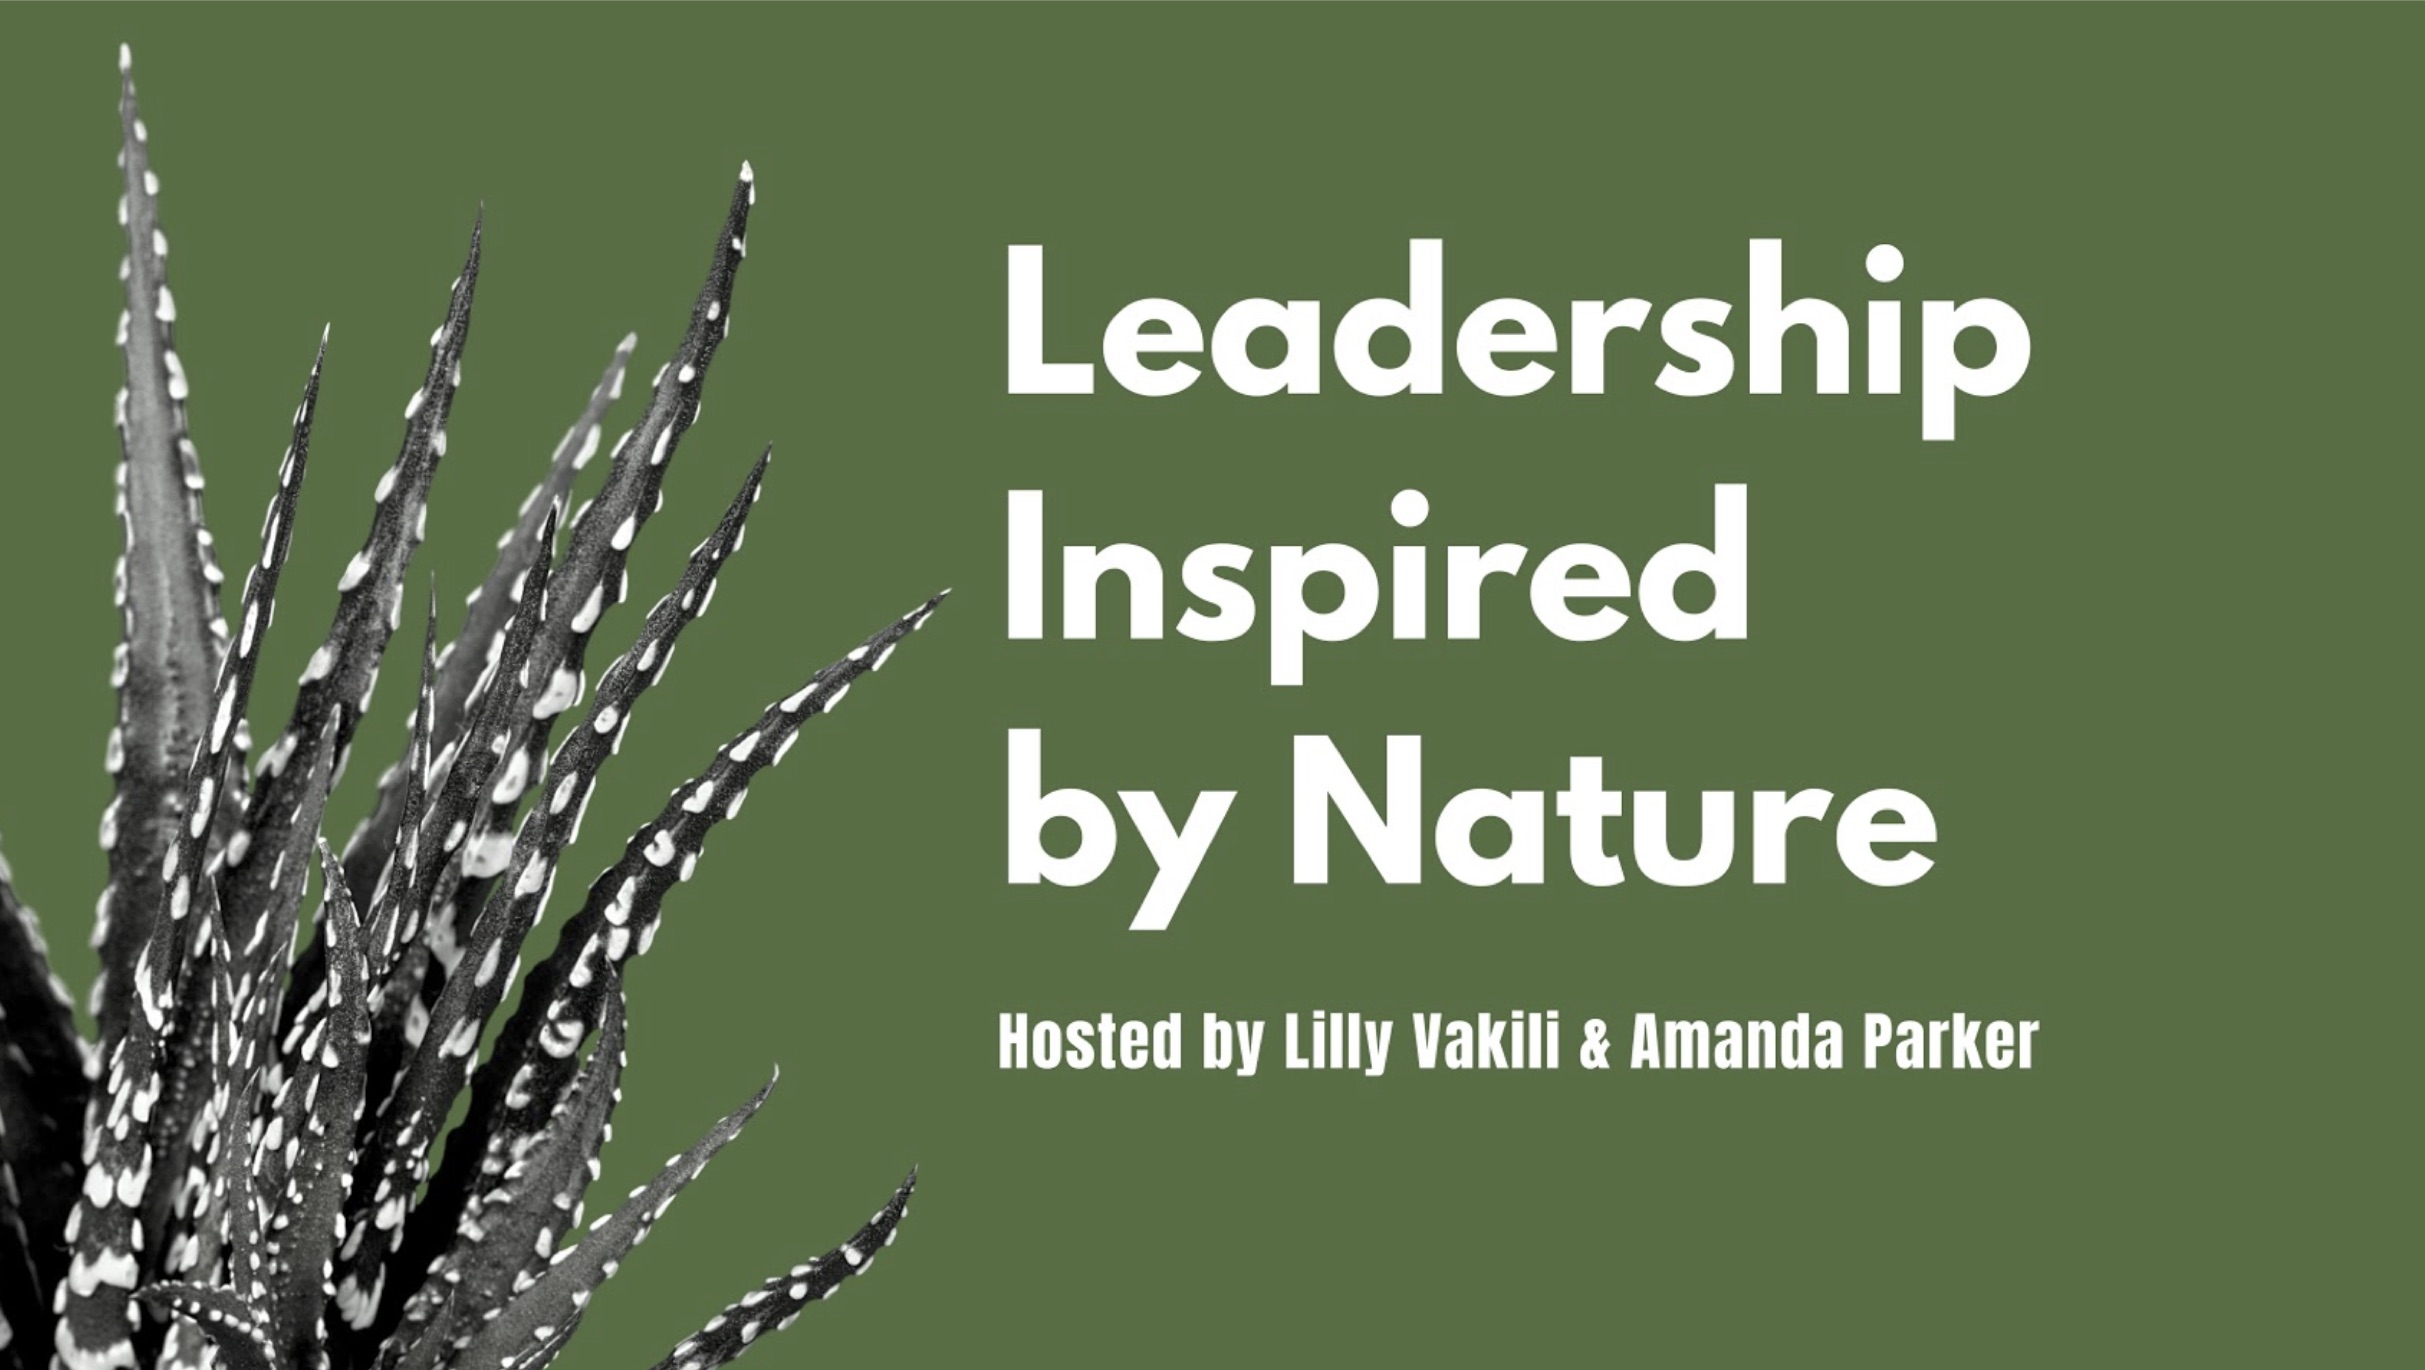 A Conversation About Leadership Inspired by Nature